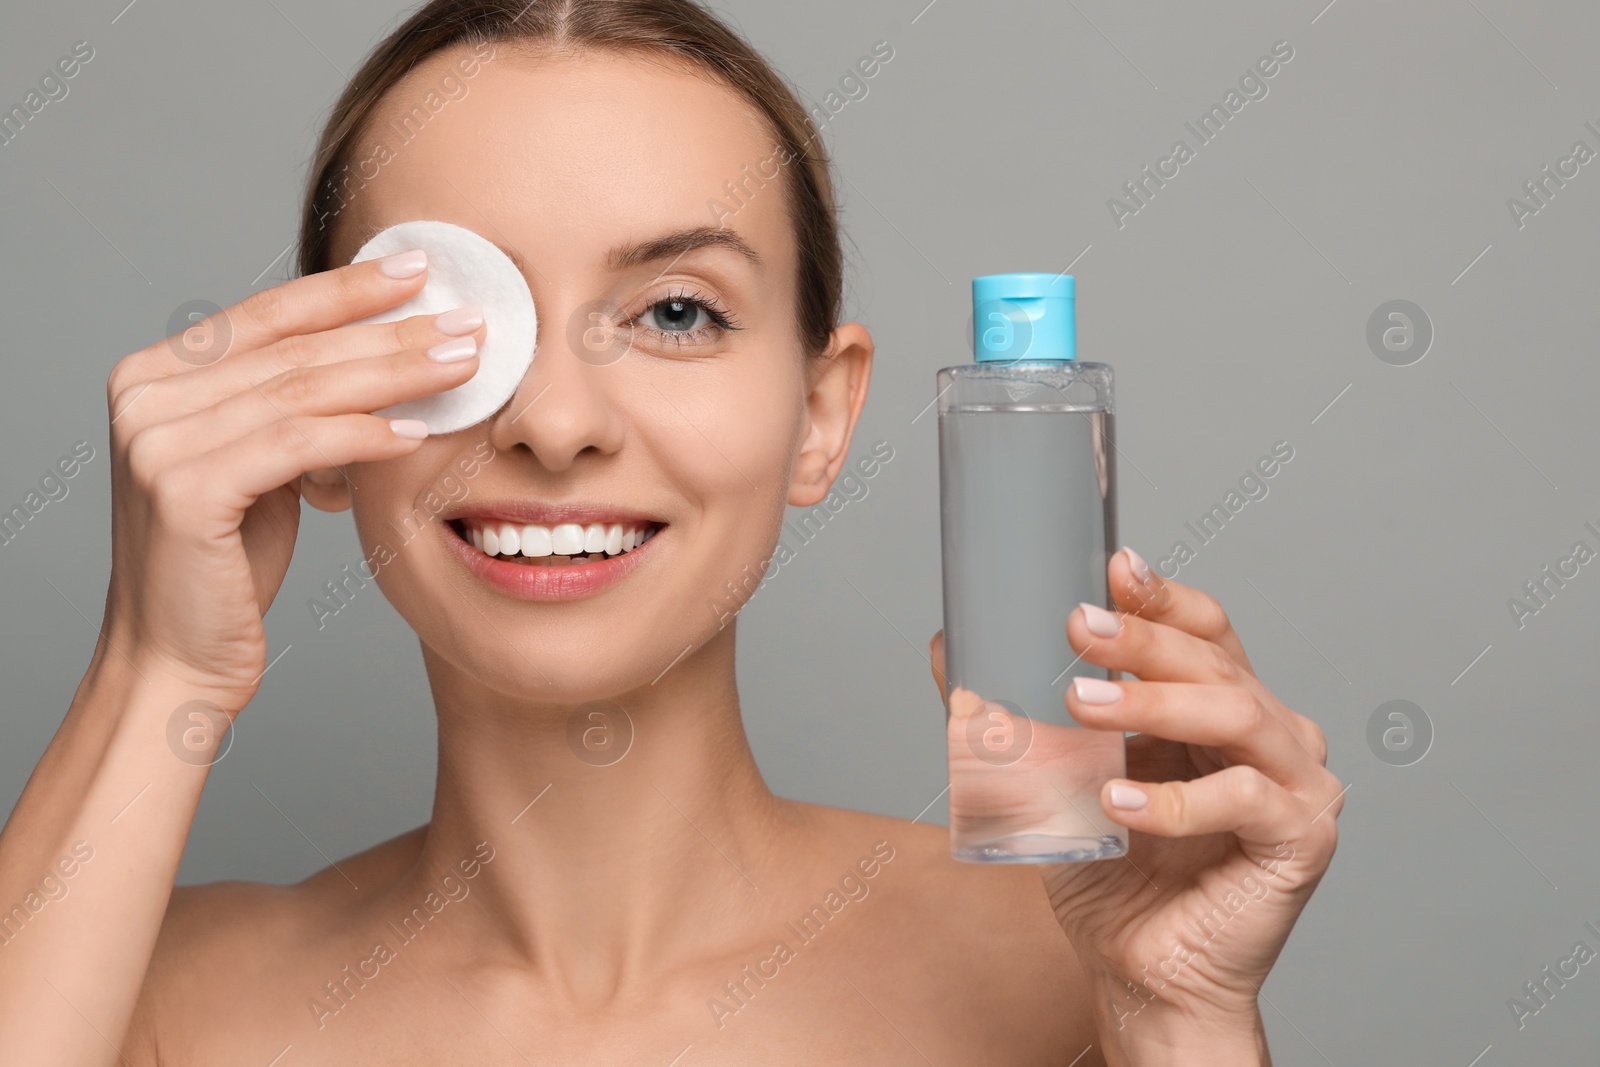 Photo of Smiling woman removing makeup with cotton pad and holding bottle on grey background, closeup